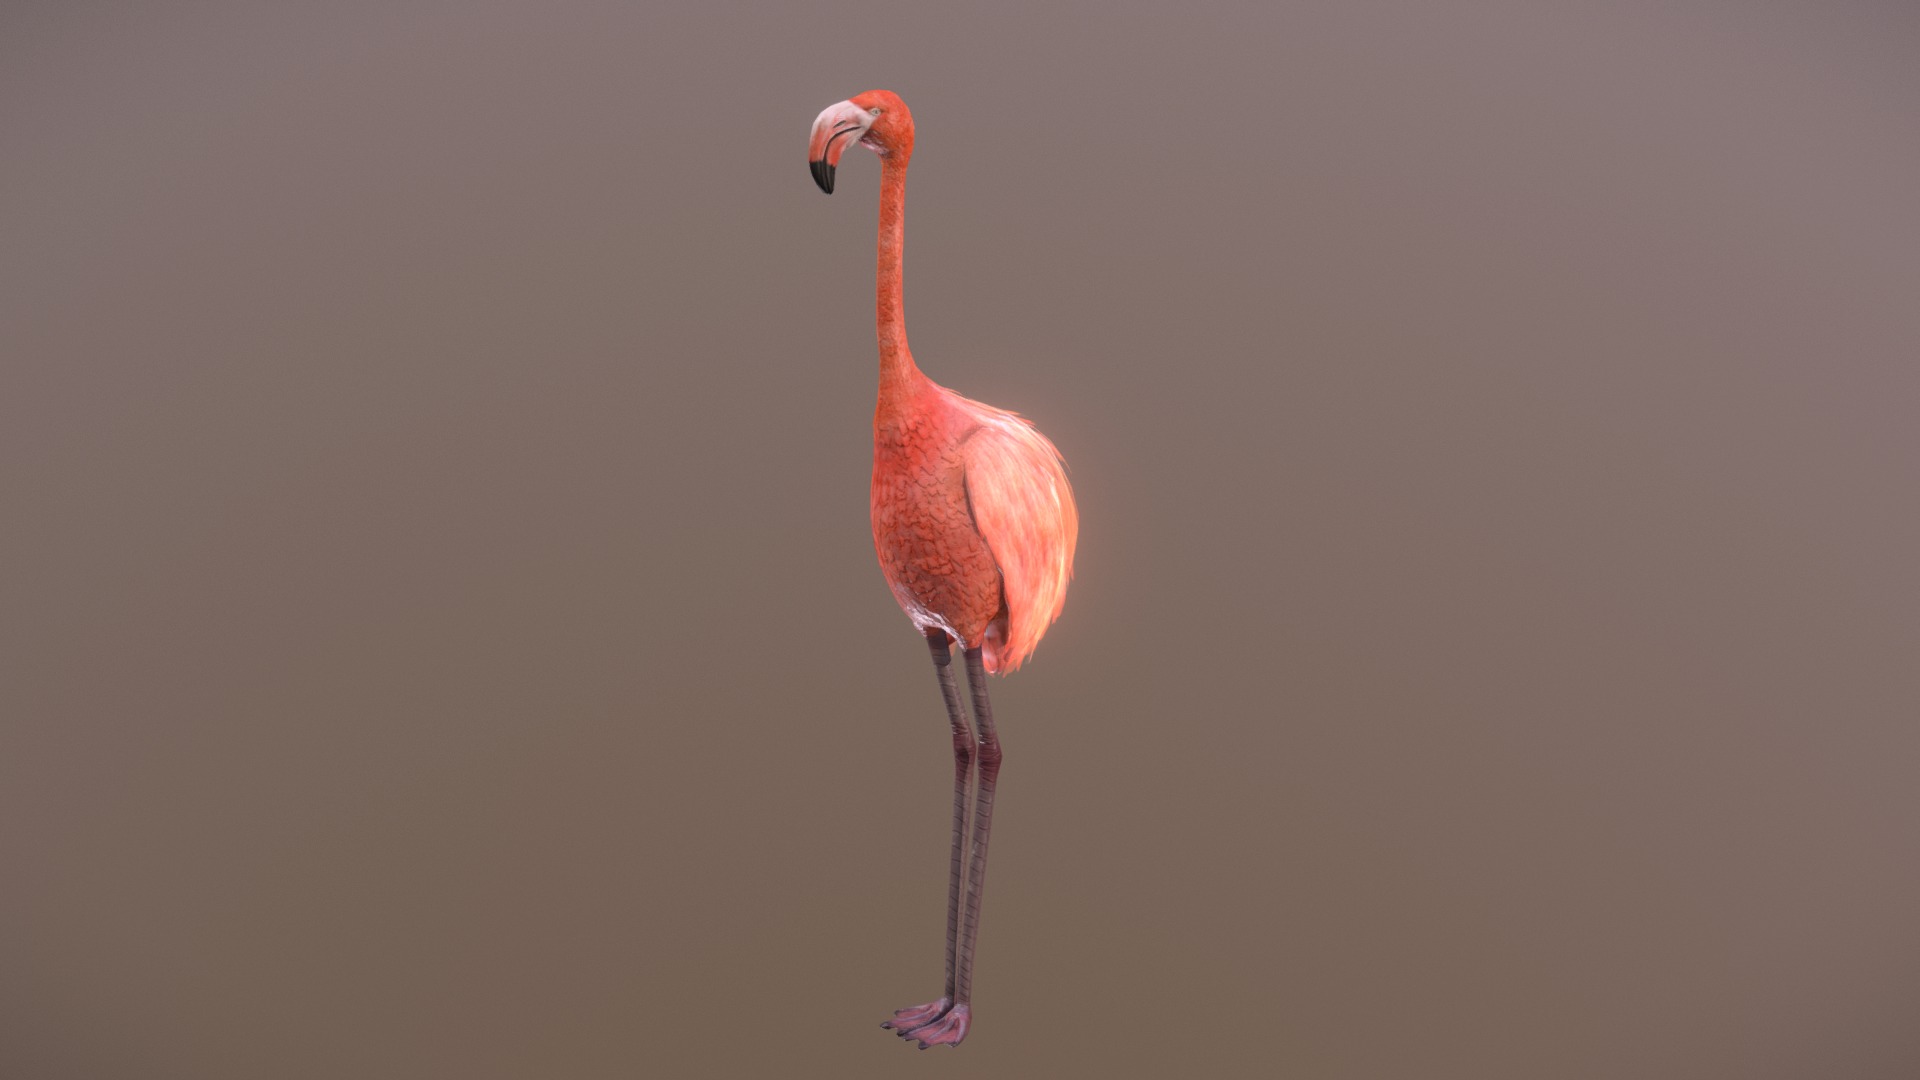 3D model Flamingo Golf Putter - This is a 3D model of the Flamingo Golf Putter. The 3D model is about a pink flamingo with a long neck.